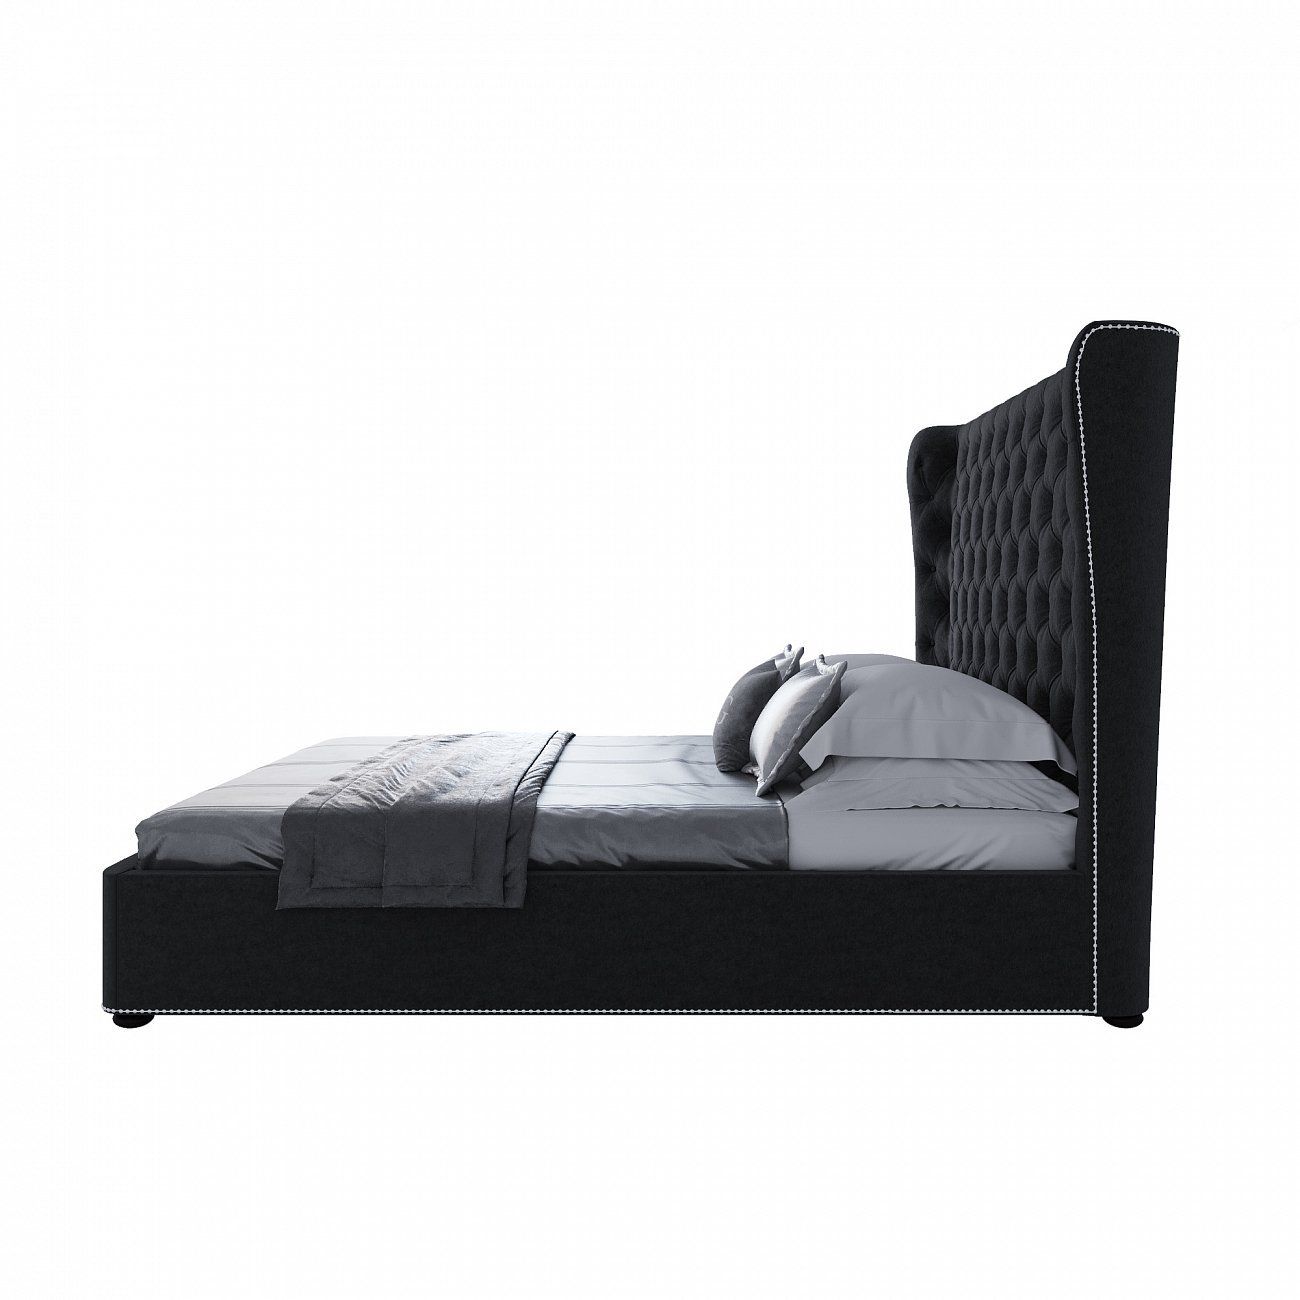 Double bed with upholstered headboard 180x200 cm anthracite Henbord